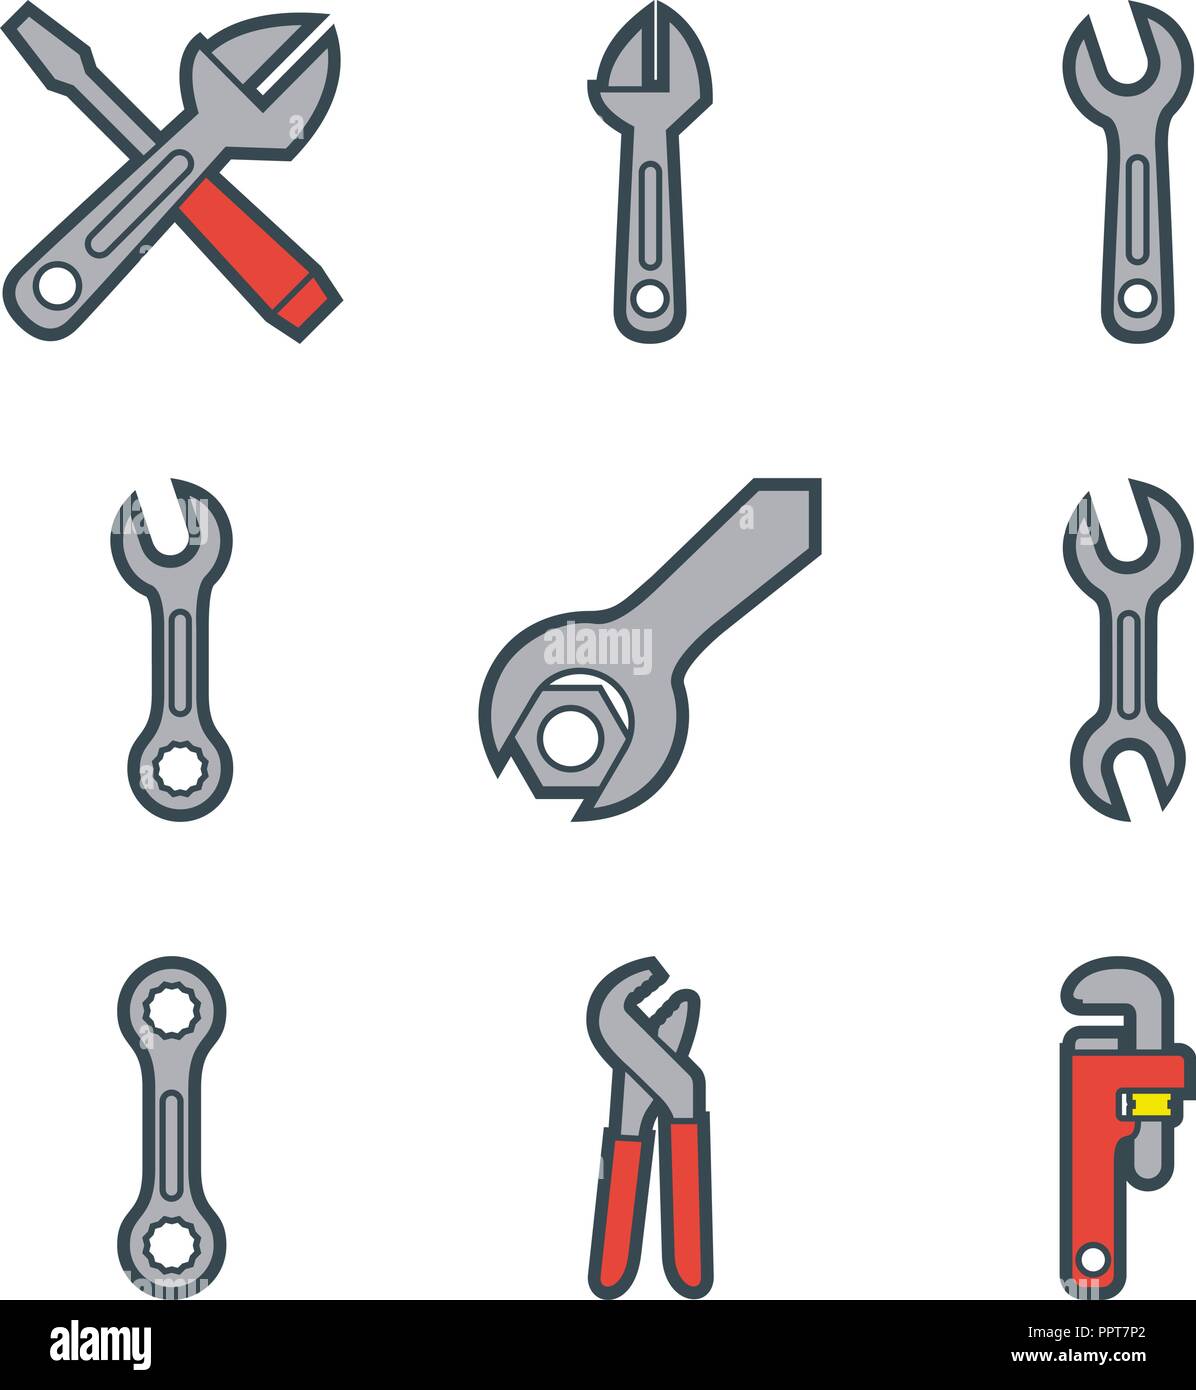 Wrenchs and Pliers Stock Vector